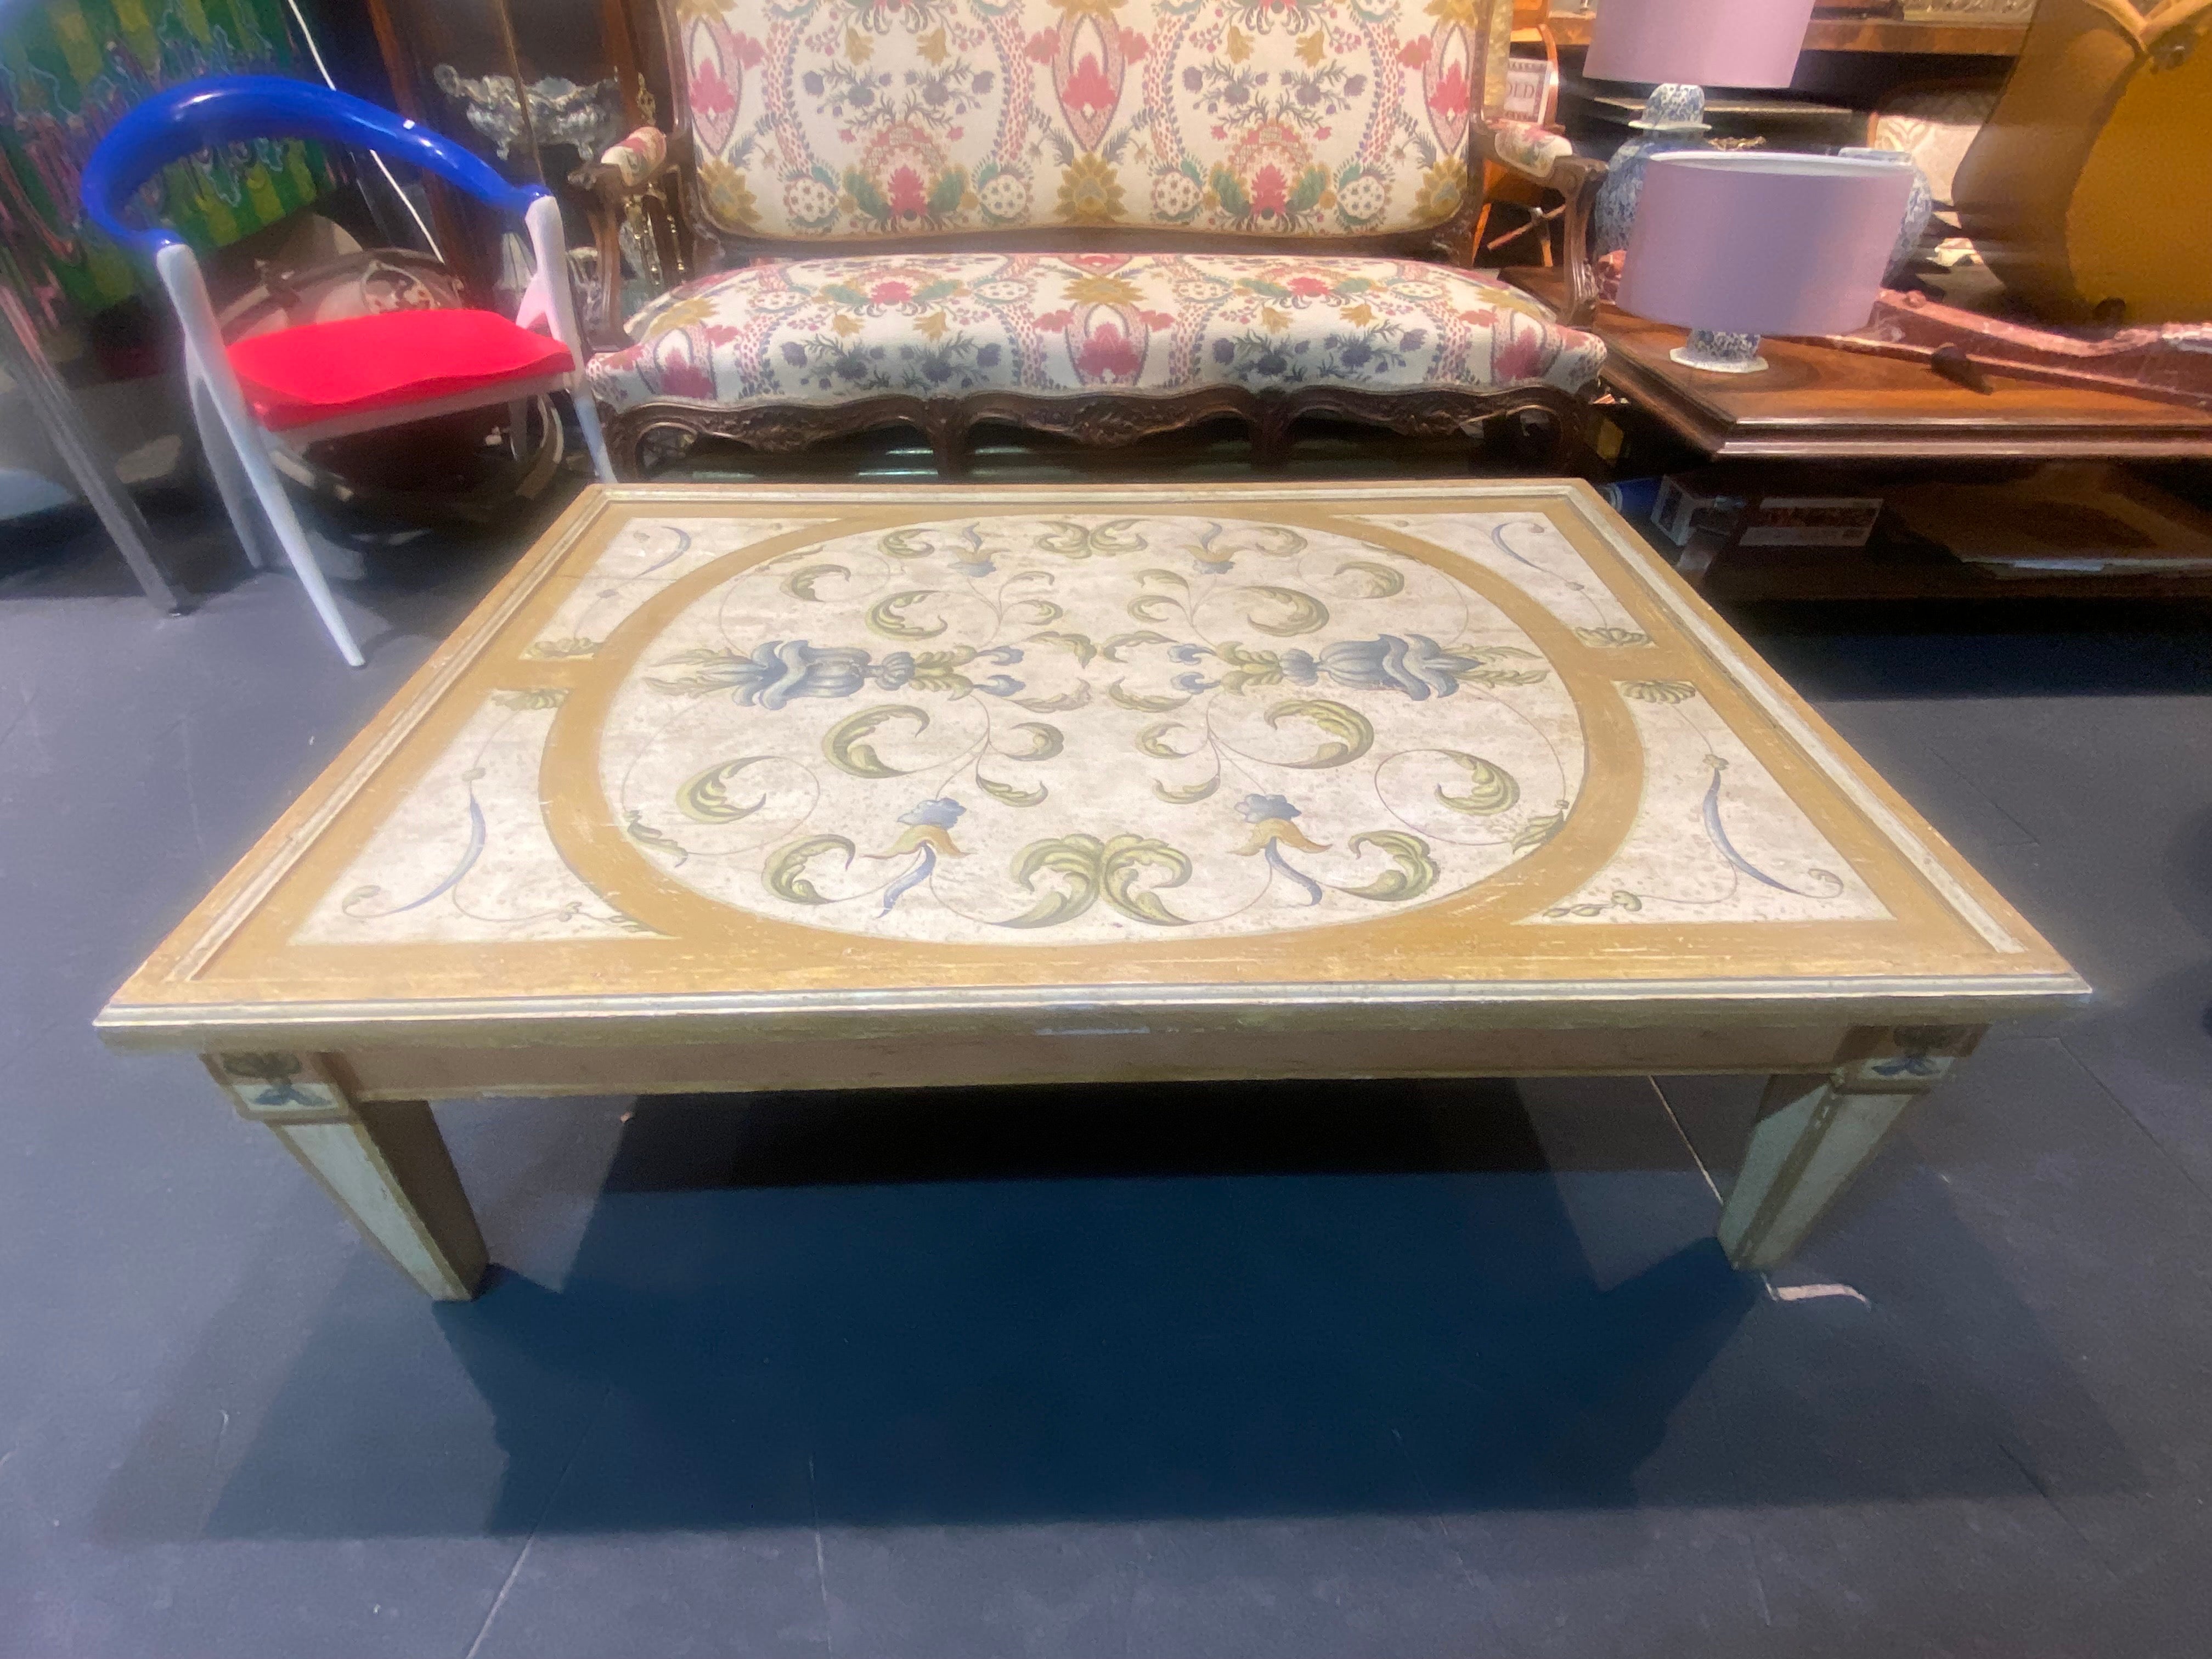 Extraordinary hand painted large sofa table made in early 19th century in Italy.
There is a small crack on the top but it is another proof of authenticity as the under top as well, which shows the airing of the table. The painting on the top is in